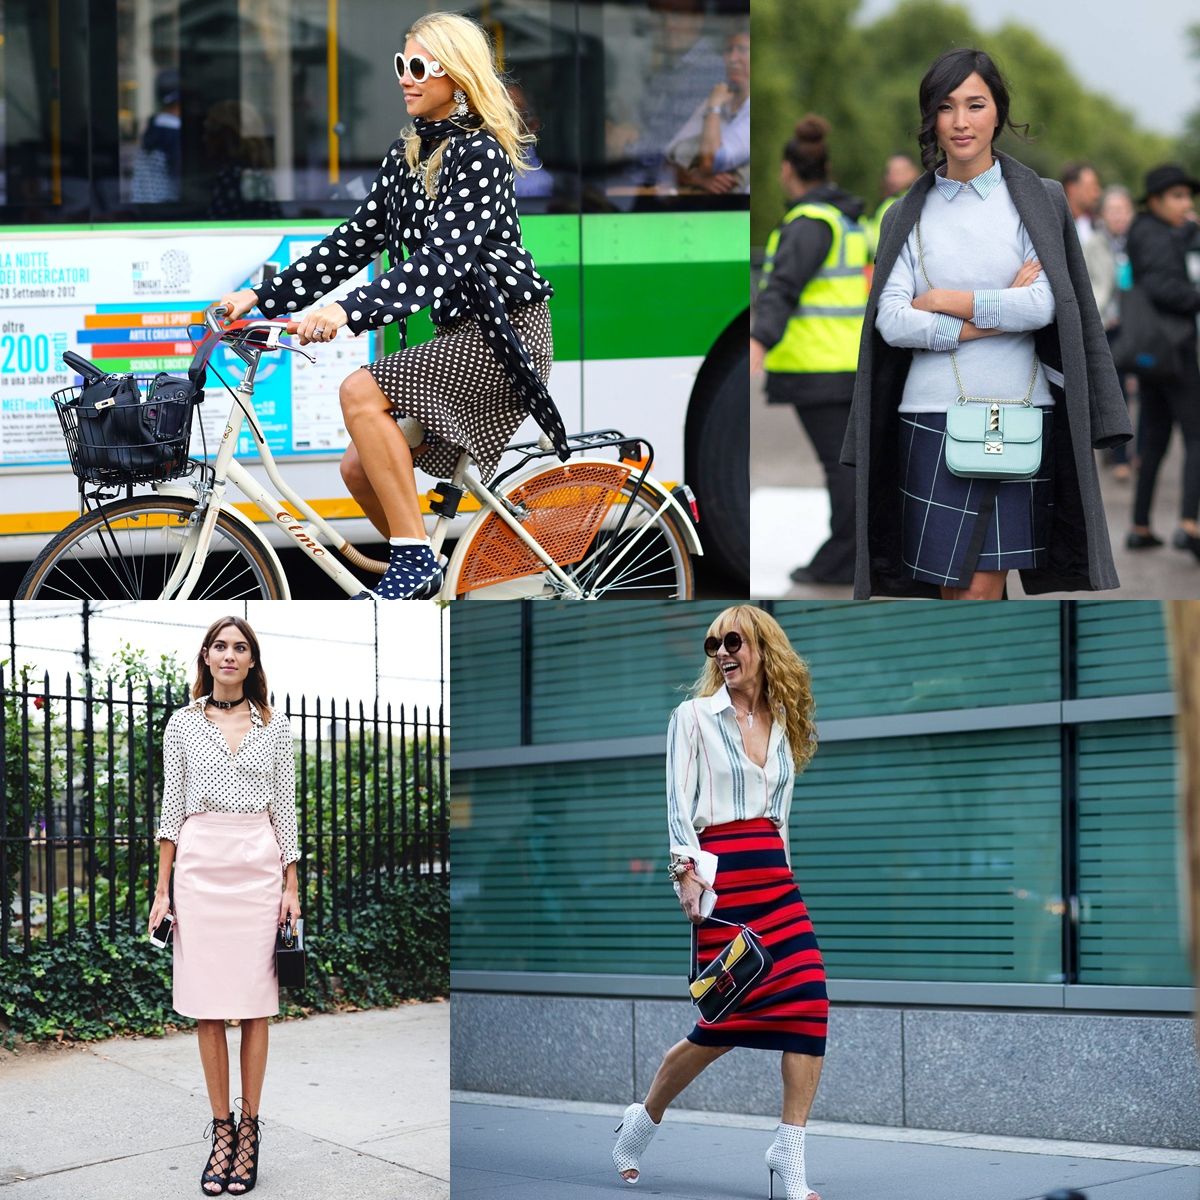 5 Tricks to Look Fashionable at Work Inspired by Street Style